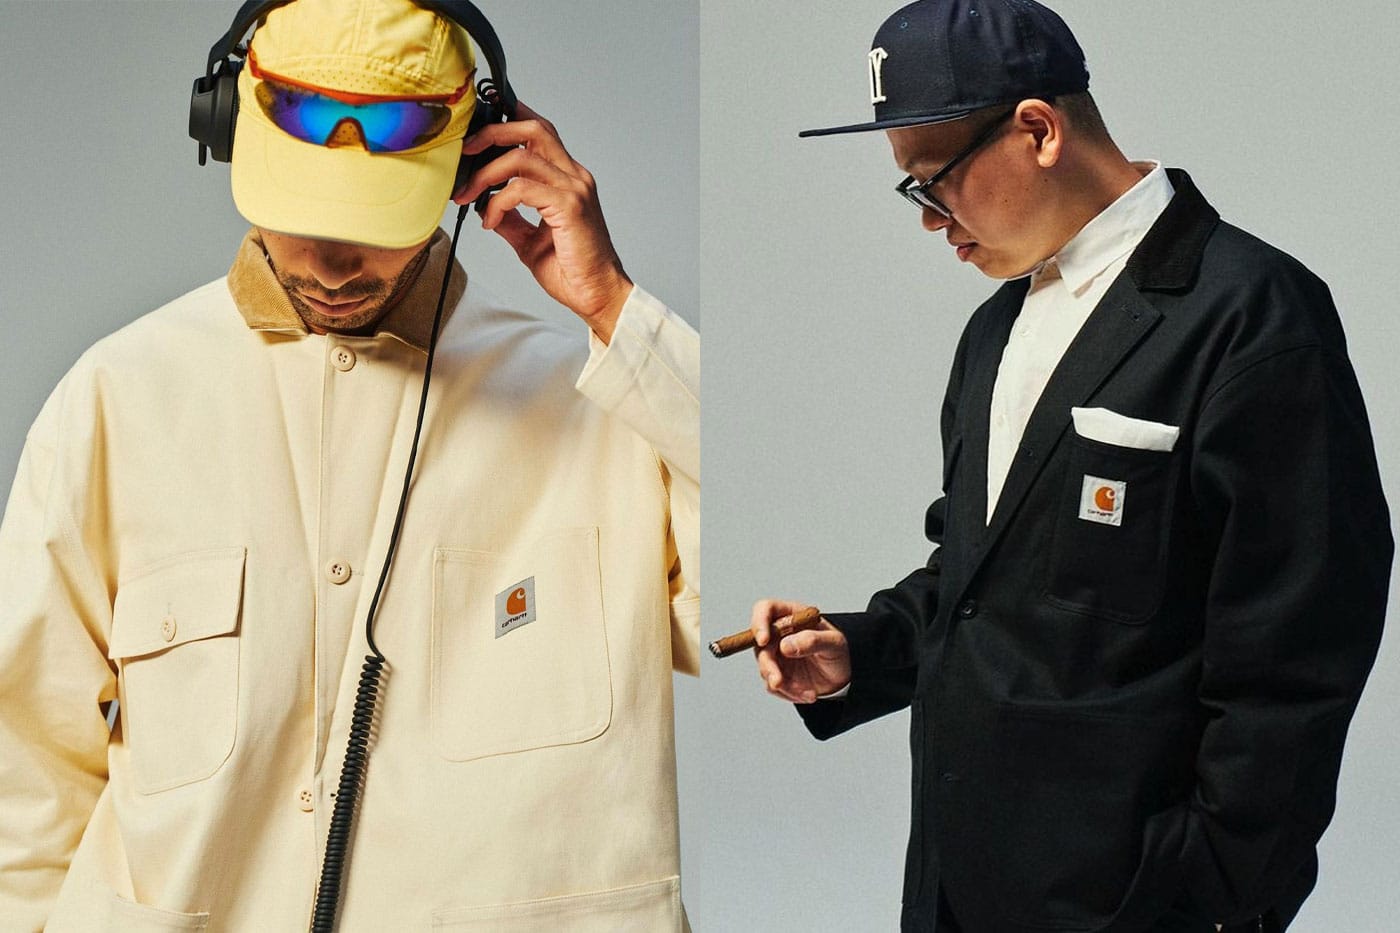 Kunichi Nomura and Carhartt WIP Deliver All-Day Workwear Suits 